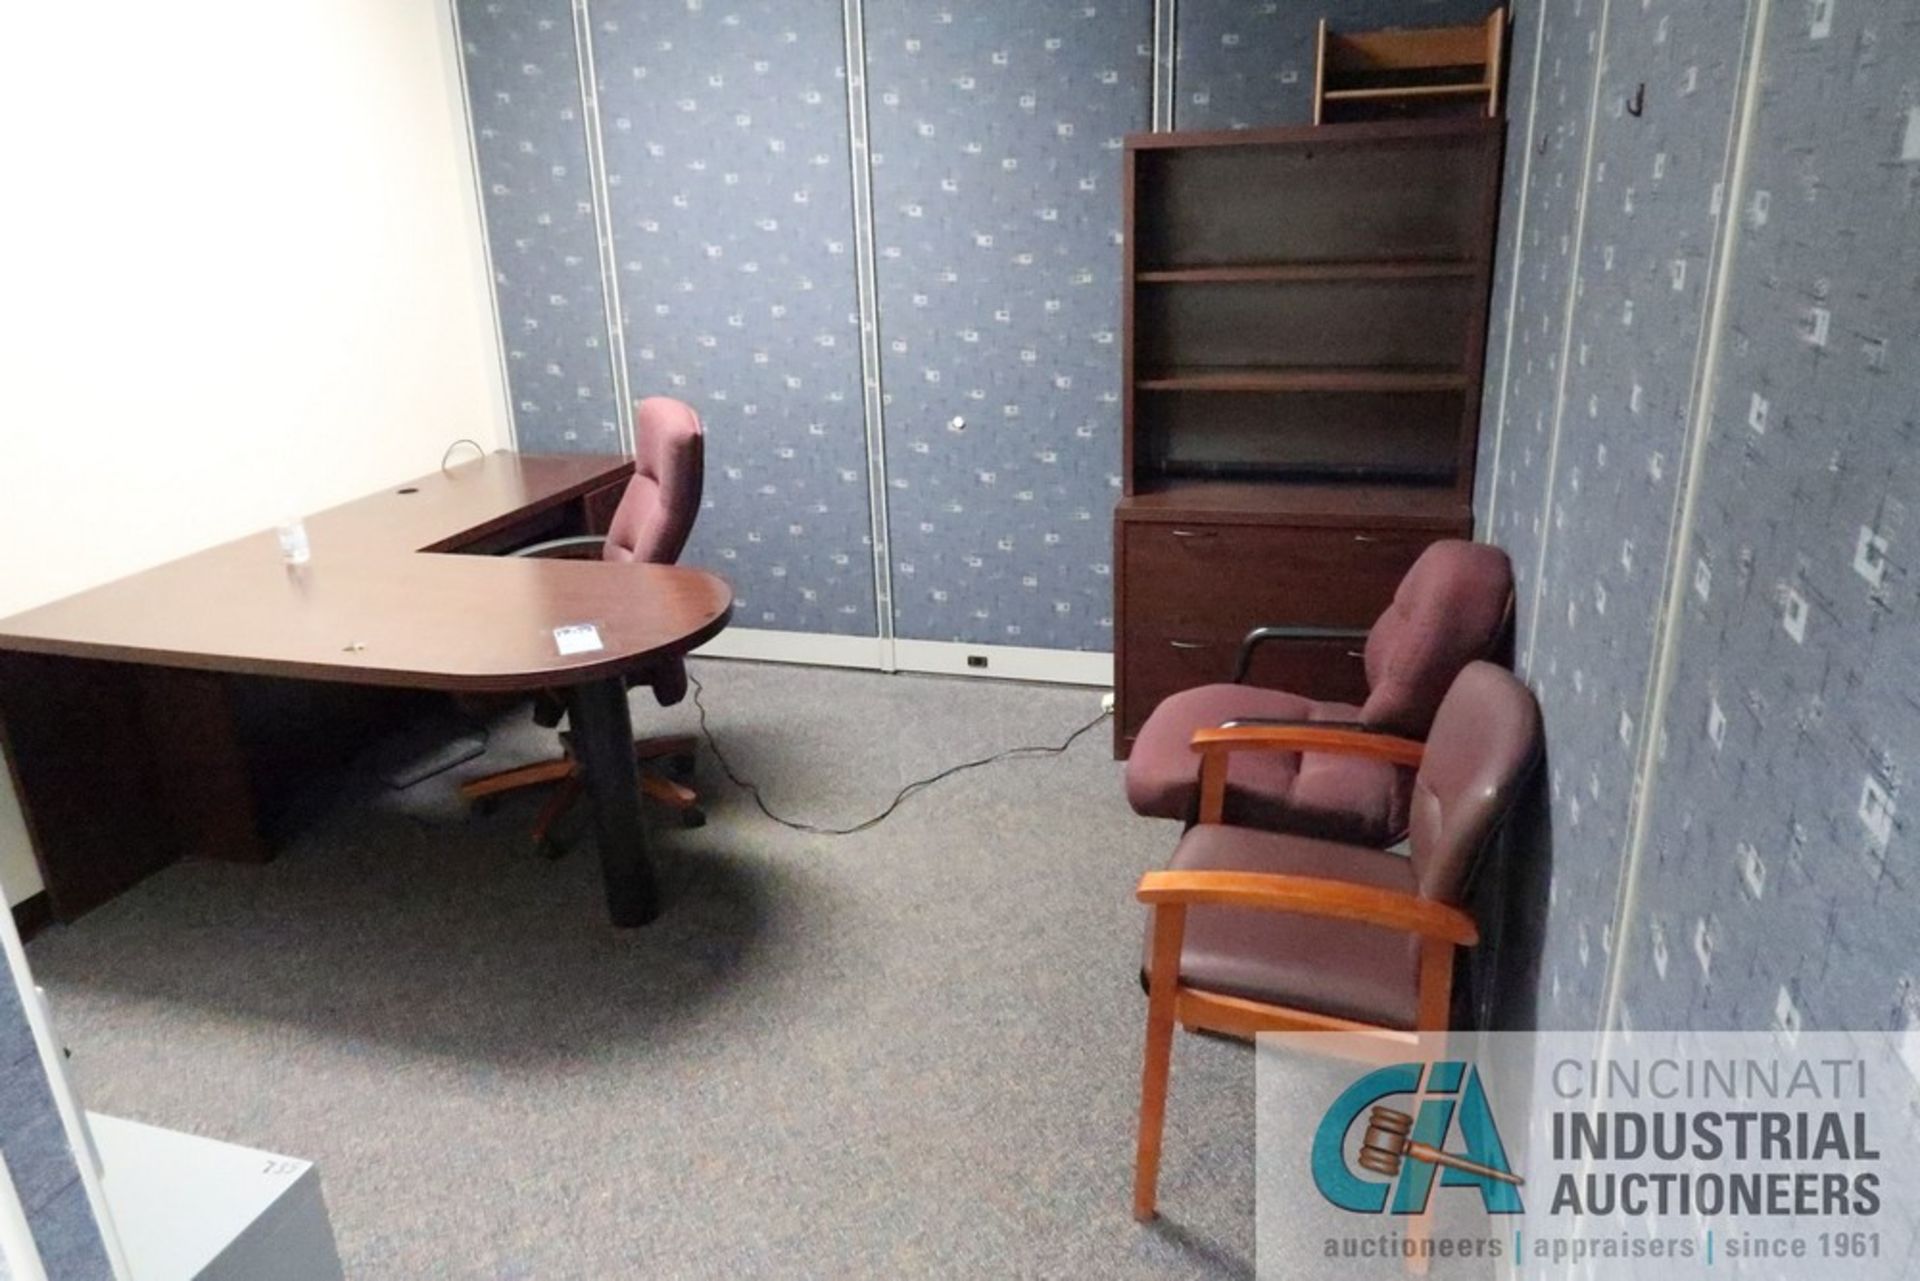 (LOT) CONTENTS OF OFFICE INCLUDING L-SHAPED DESK, 2-DRAWER CABINET, BOOKSHELF, (3) CHAIRS